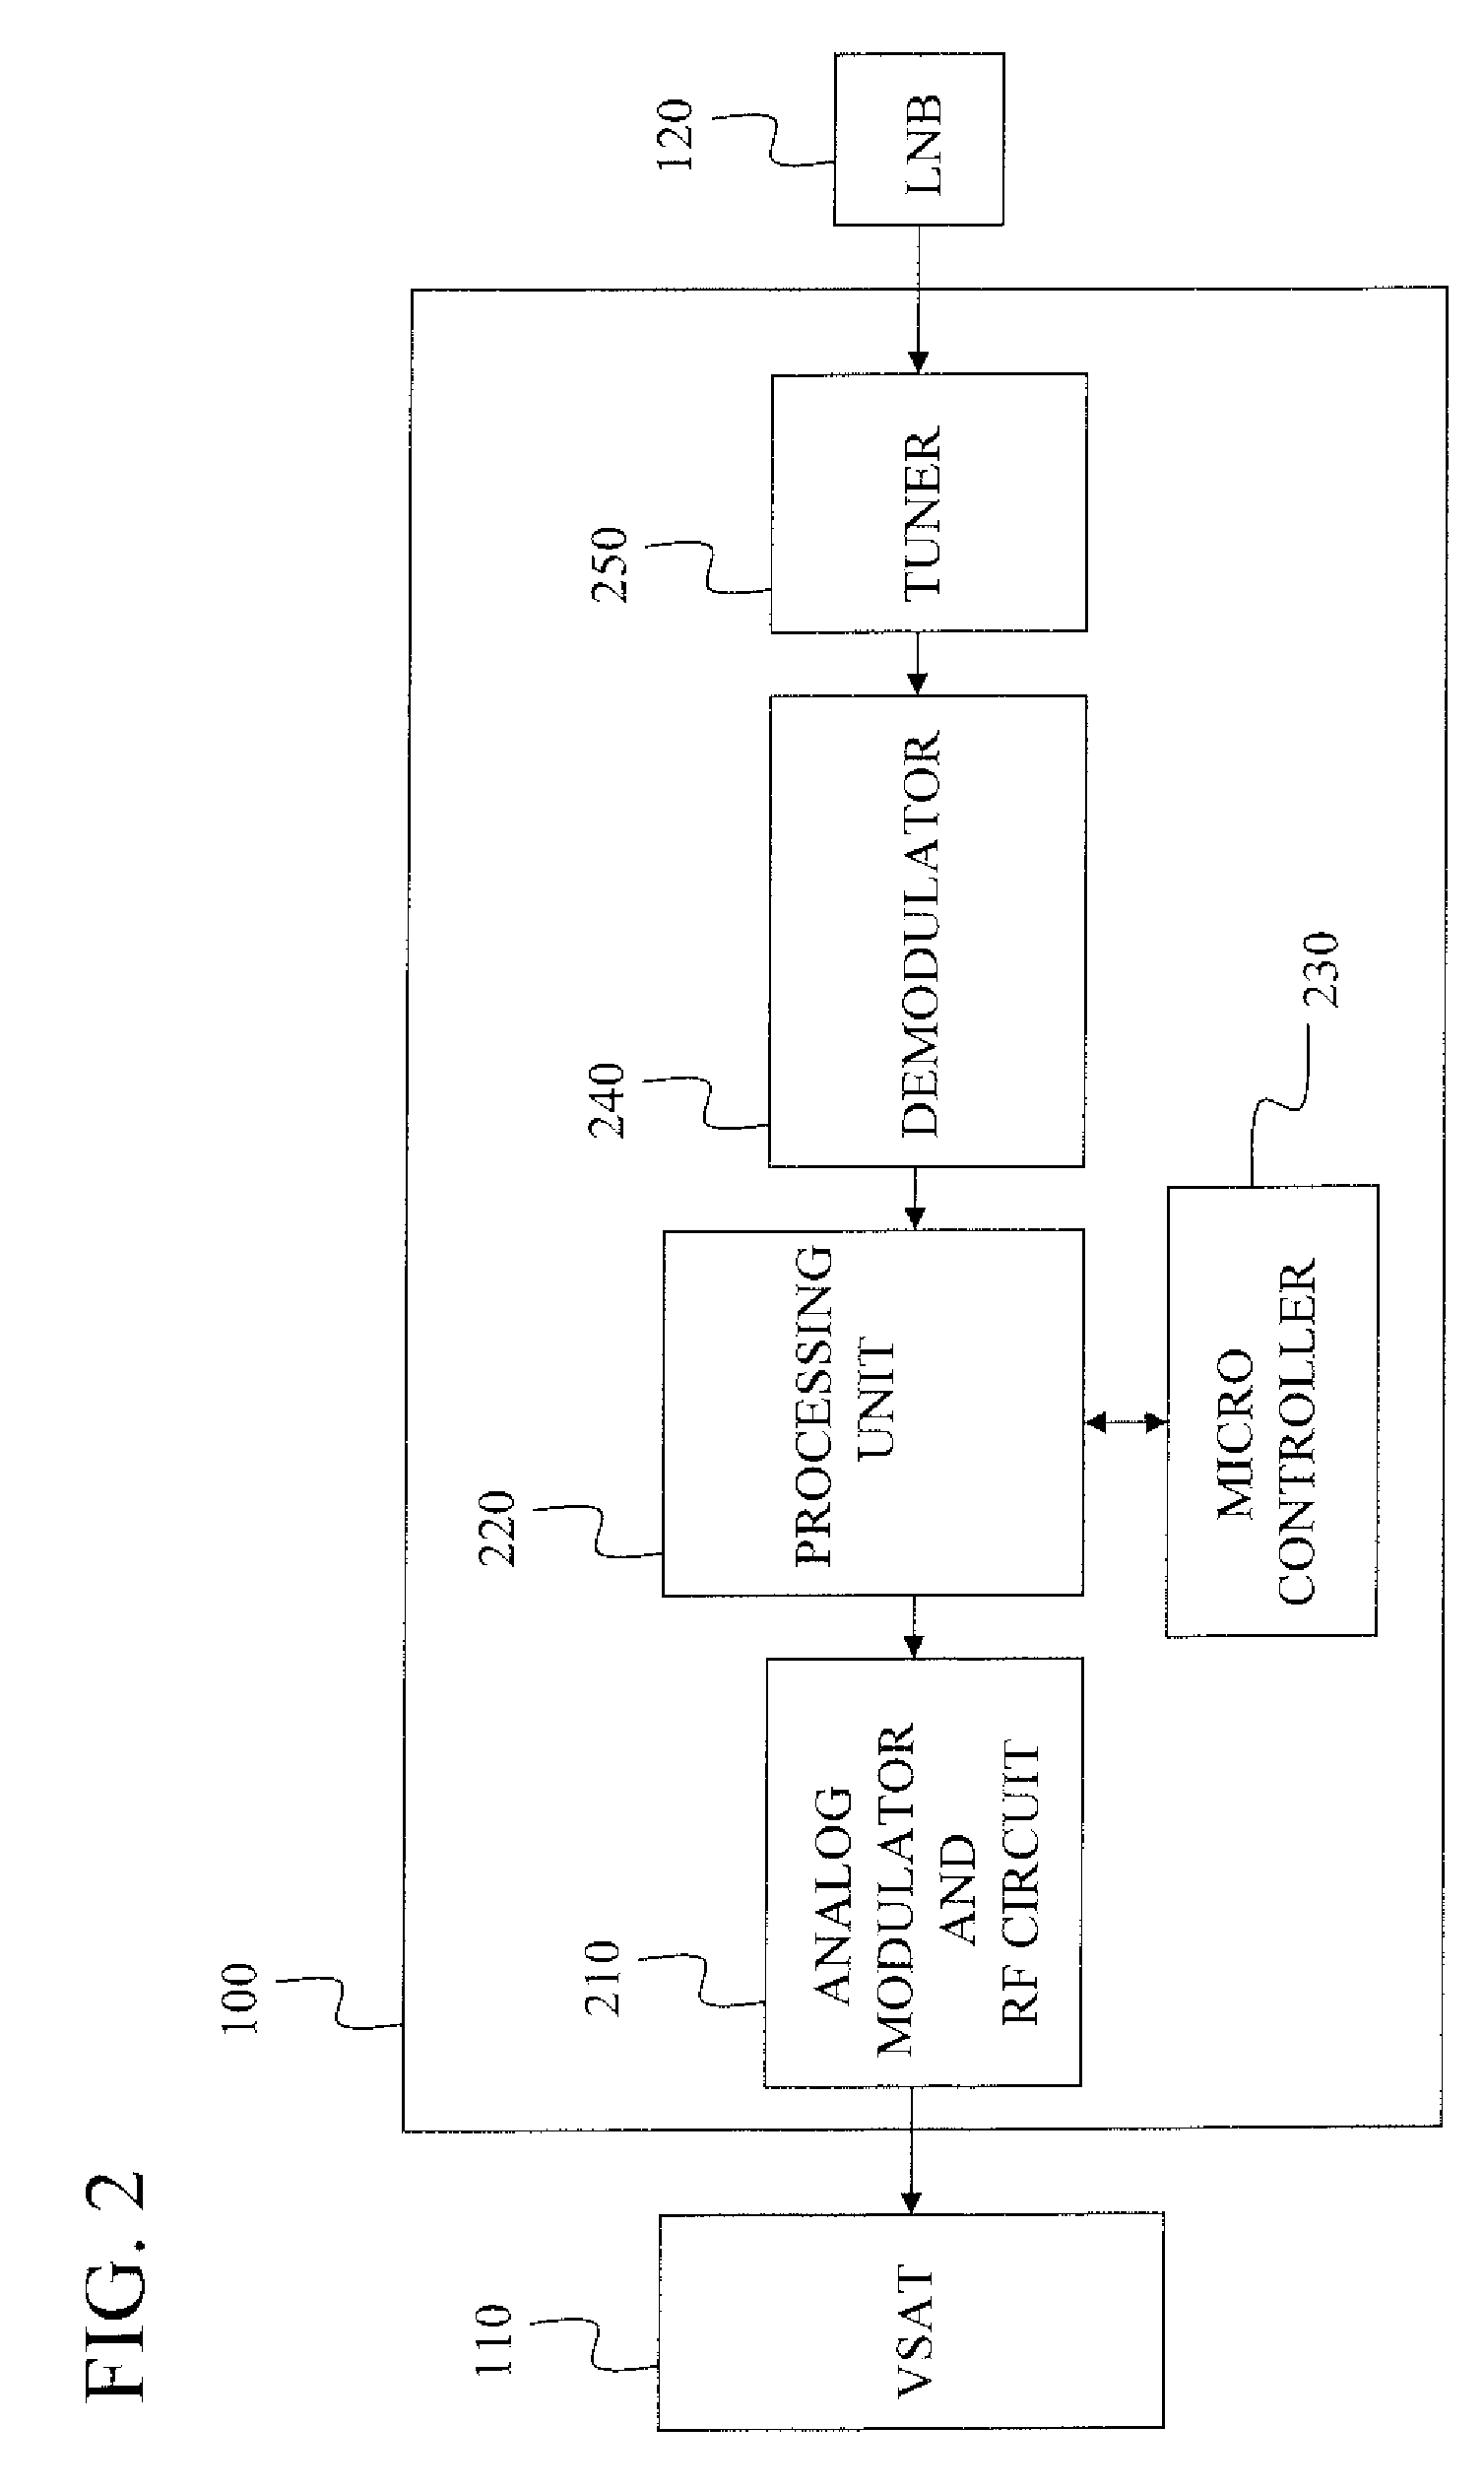 Transmodulator for very small aperture terminals employing internet protocol based communications